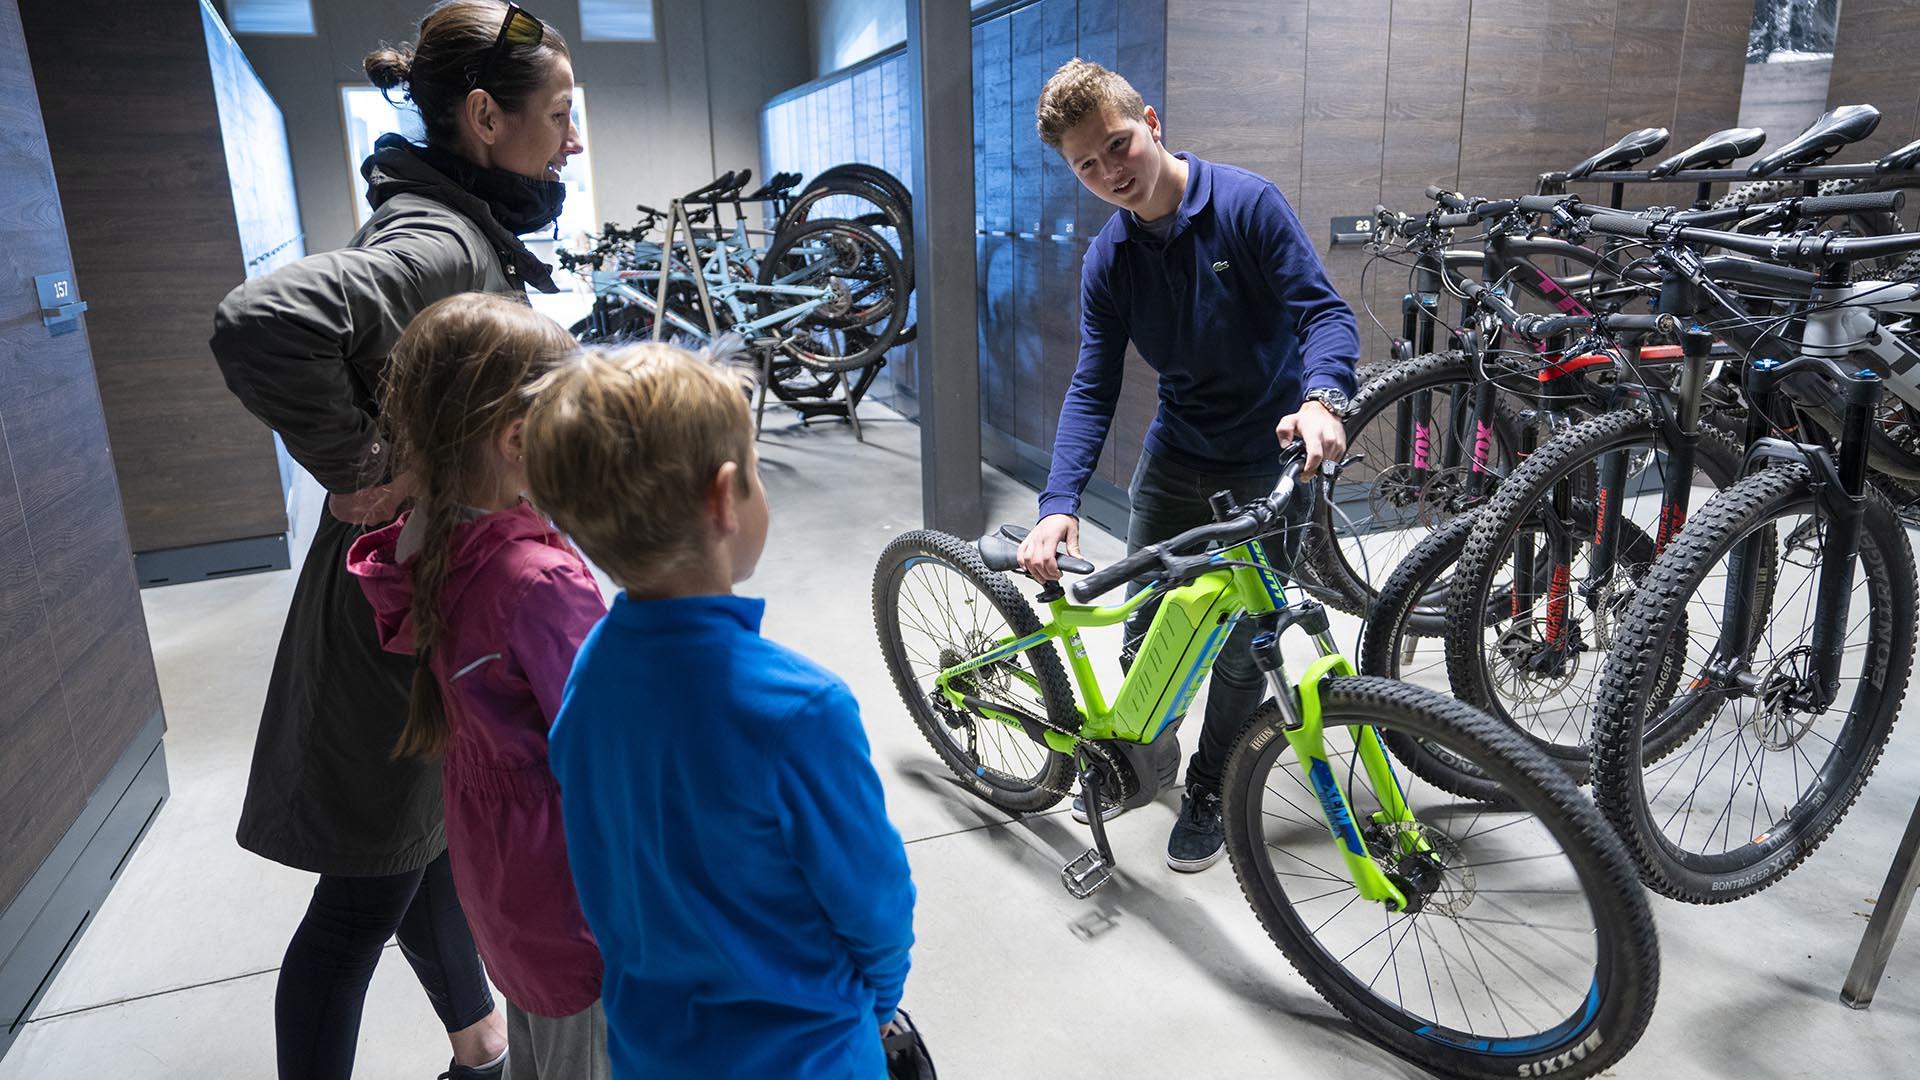 A staff member in a bicycle rental shows a mountain bike to a family.